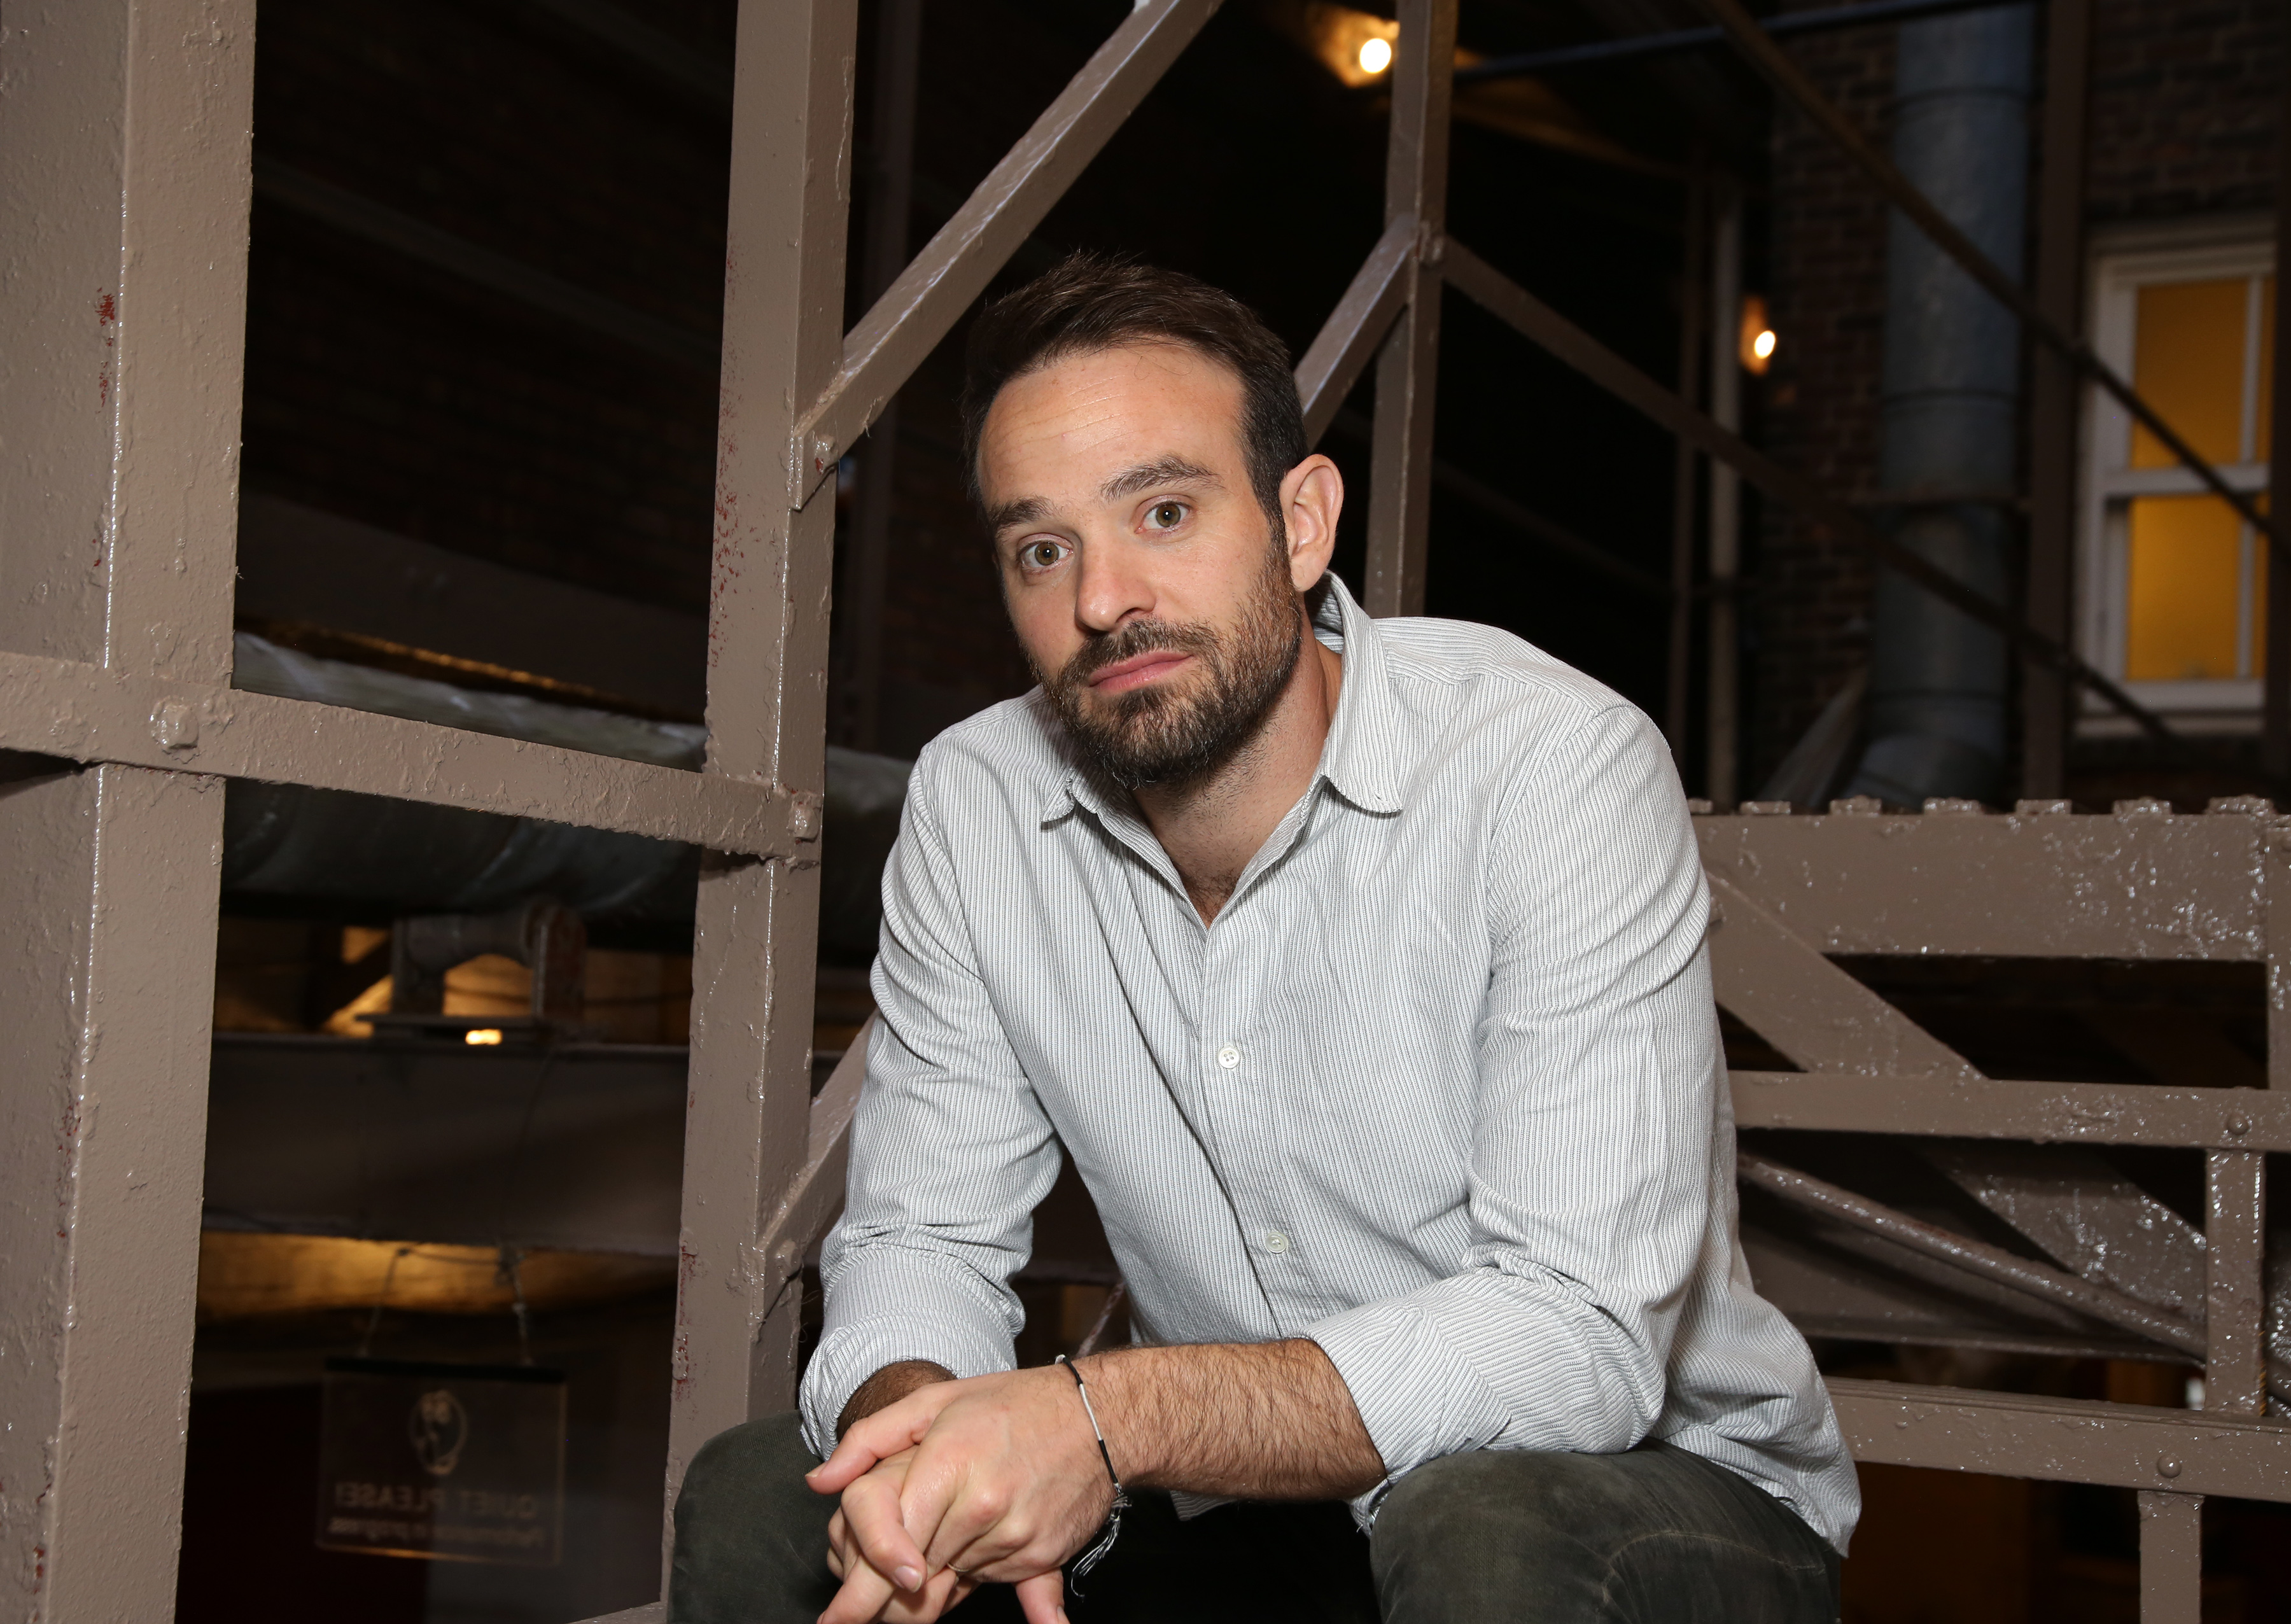 Charlie Cox, who appears as Daredevil in a 'Spider-Man: No Way Home' deleted scene, wears a white striped button-up shirt and dark gray jeans.